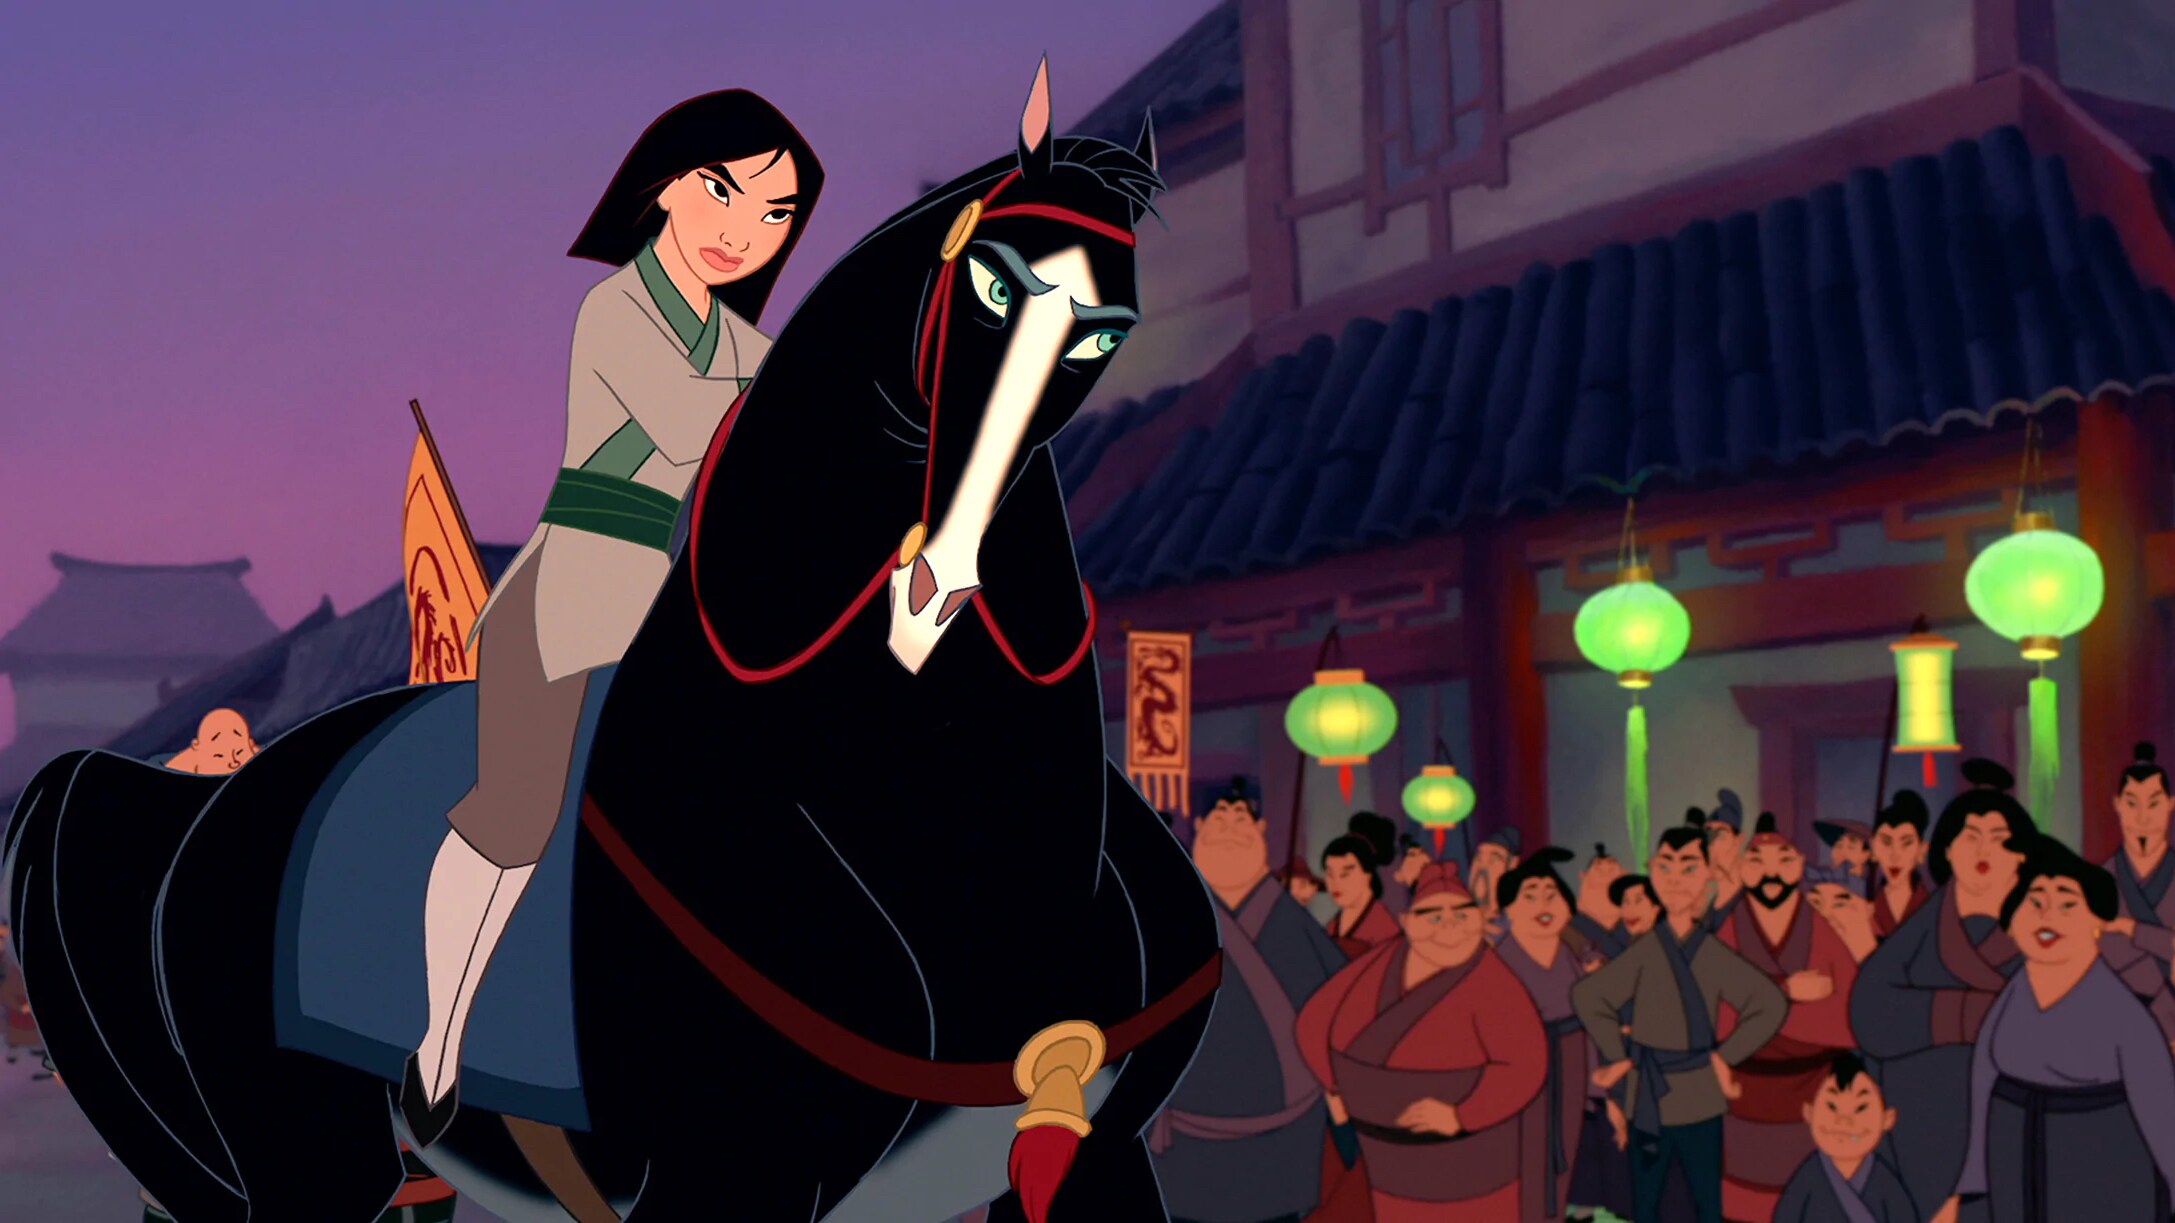 Mulan riding into the city to warn her friends about the Huns.